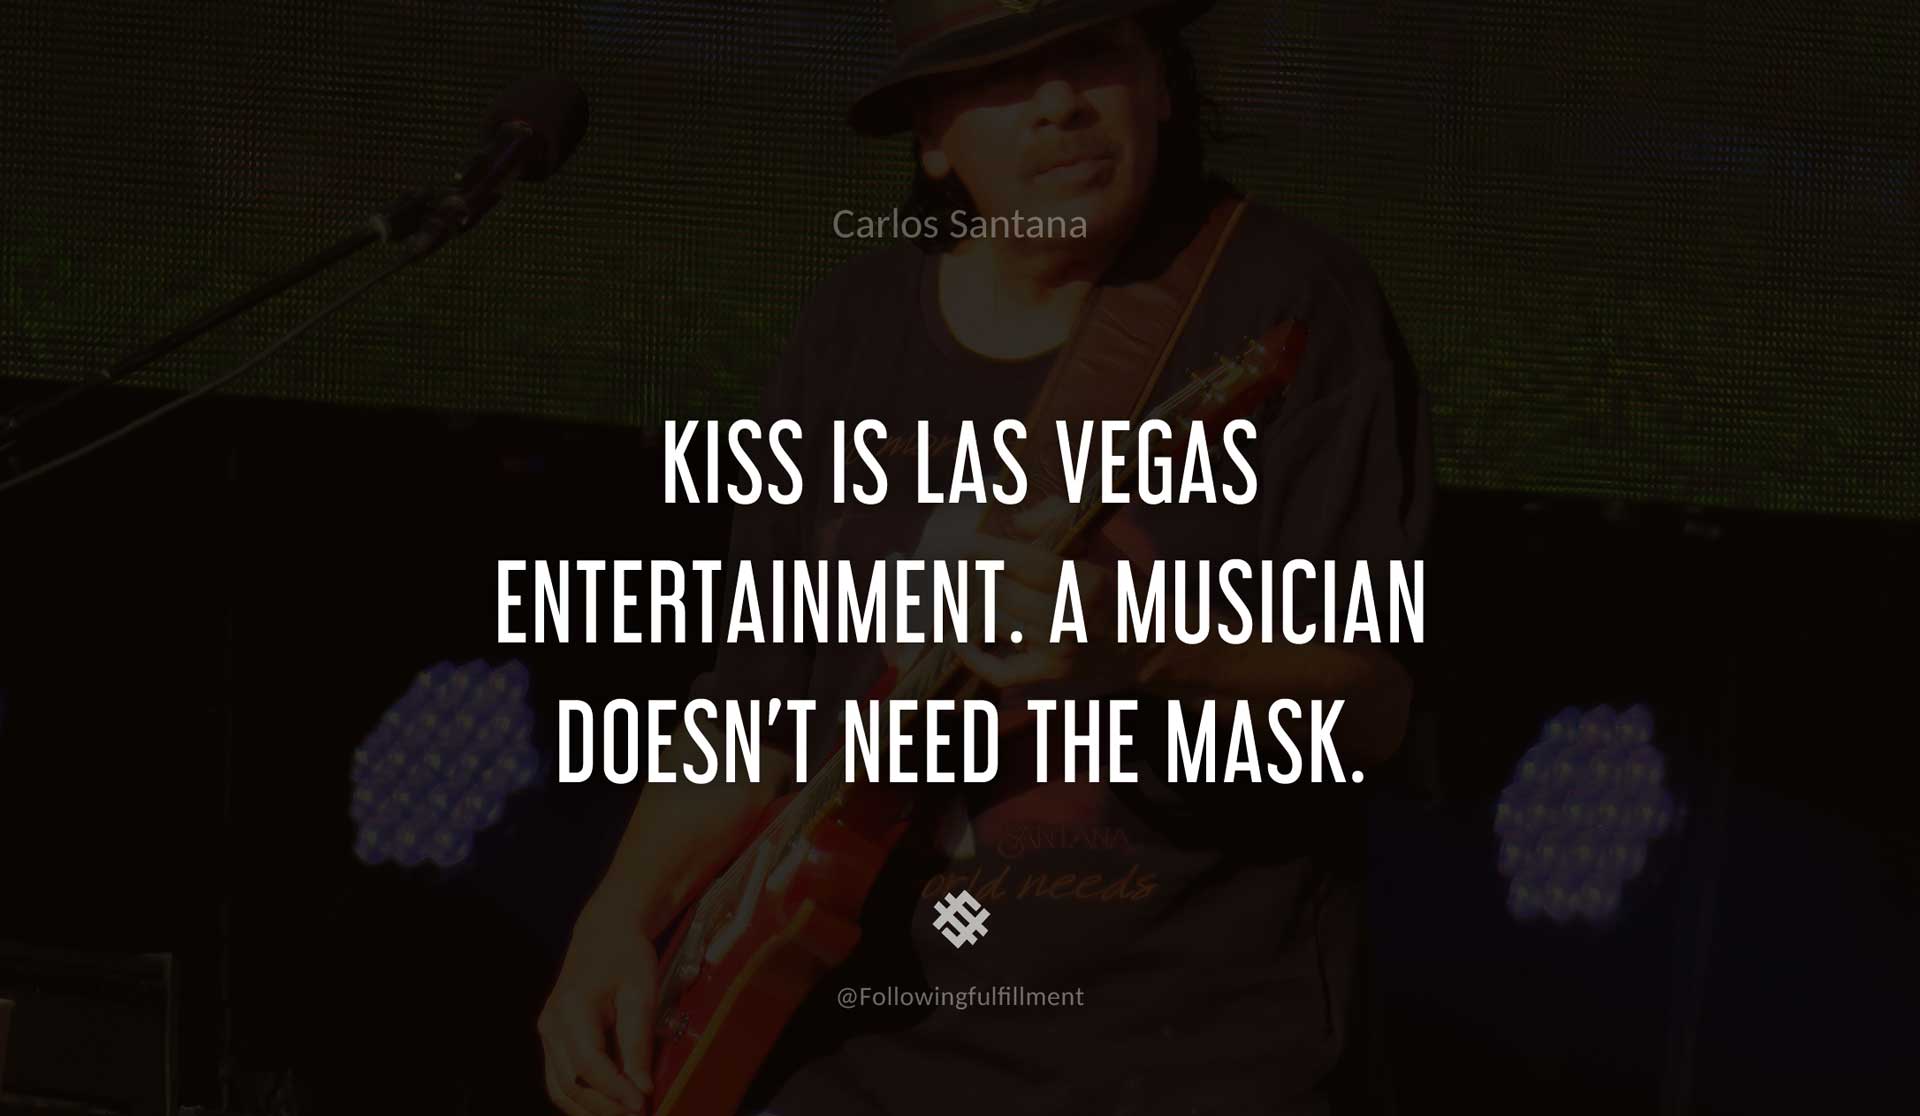 KISS-is-Las-Vegas-entertainment.-A-musician-doesn't-need-the-mask.-CARLOS-SANTANA-Quote.jpg